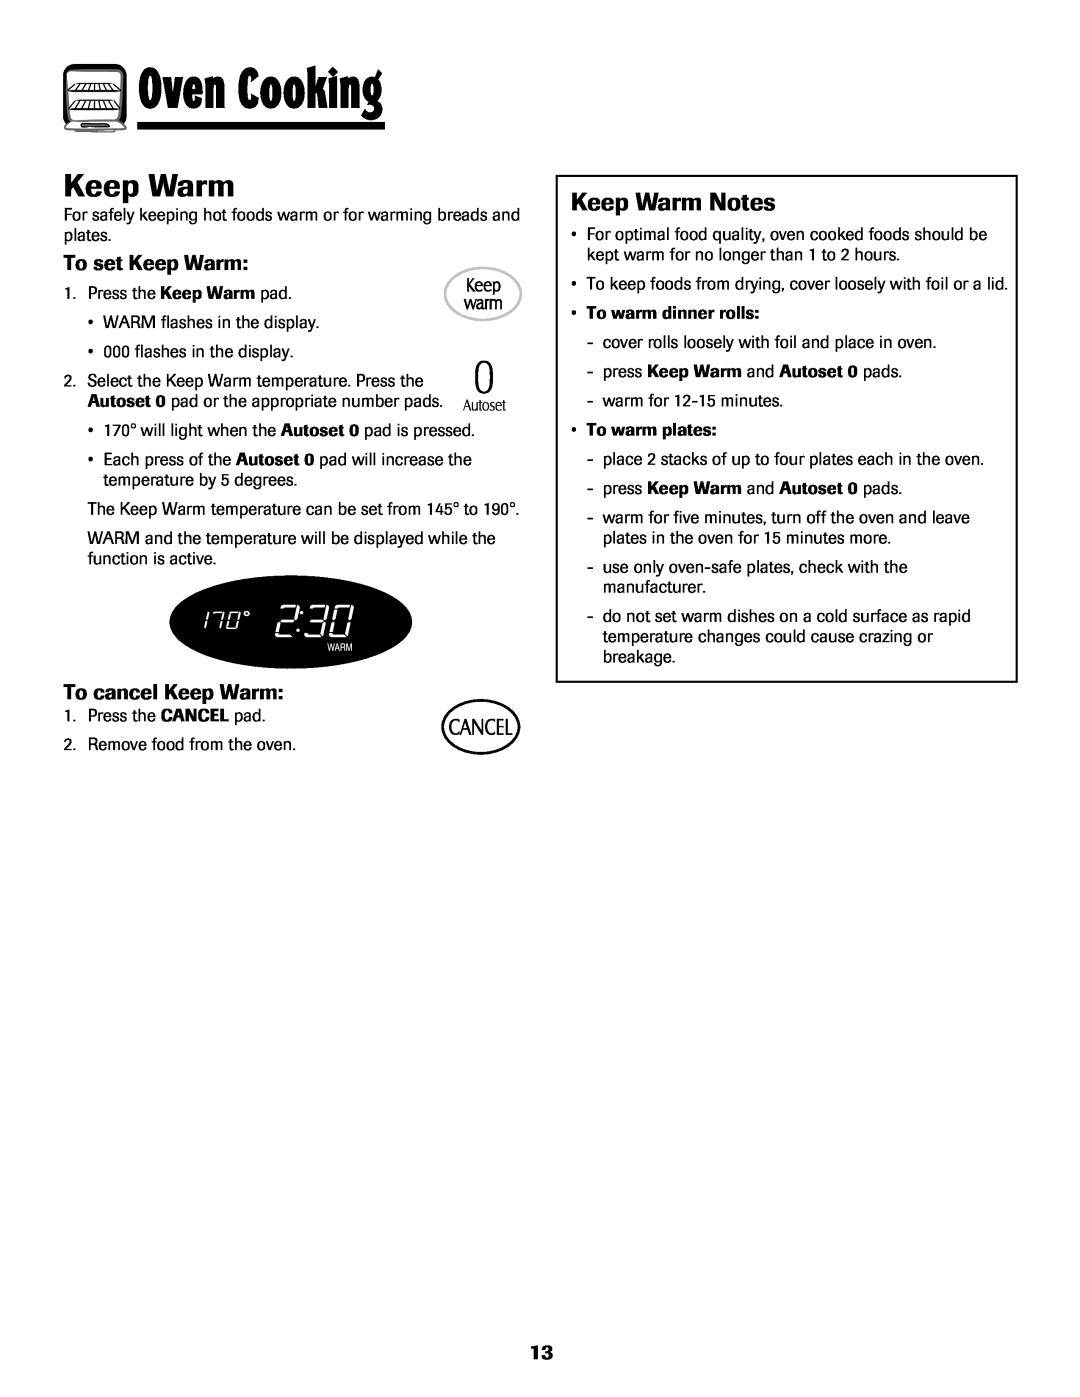 Maytag MGS5875BDW important safety instructions Keep Warm Notes, To set Keep Warm, To cancel Keep Warm, Oven Cooking 